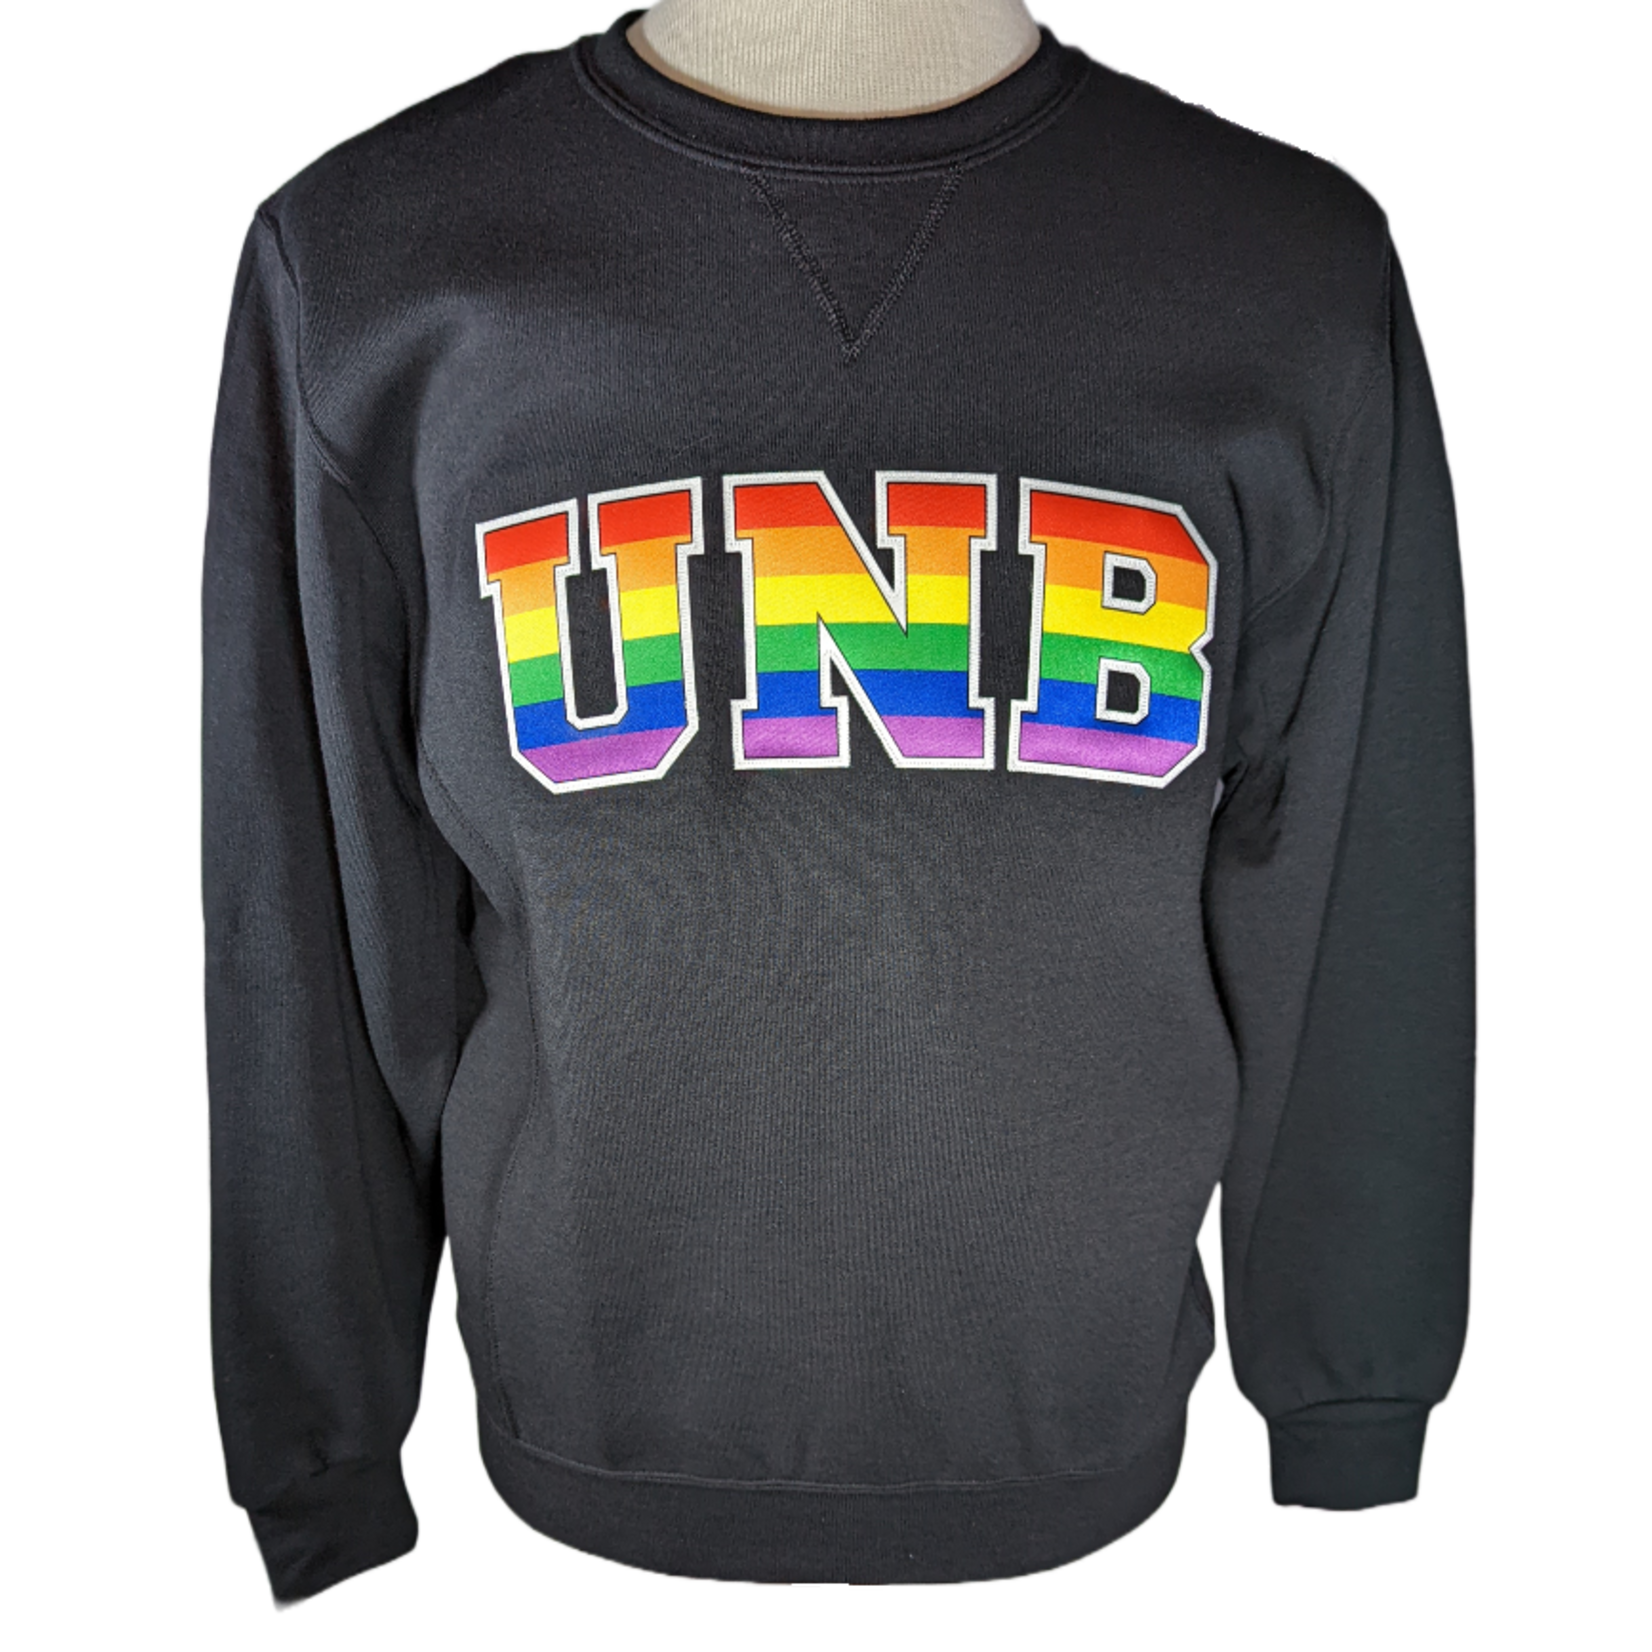 Russell Athletic UNB Pride Crewneck Sweater